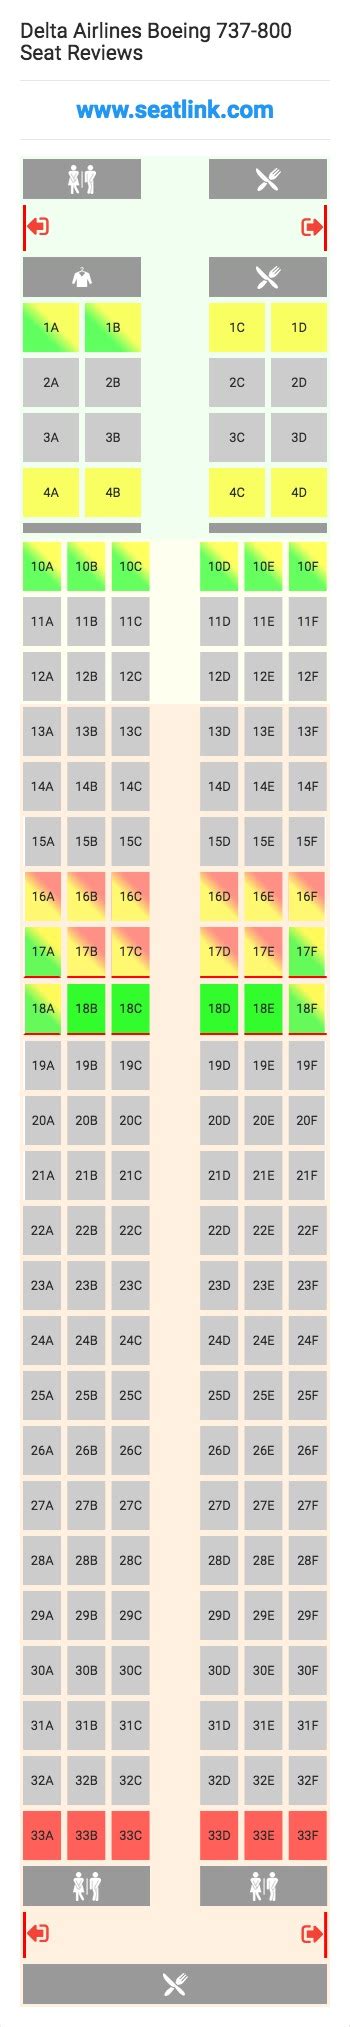 Delta Airlines Boeing 737 800 Seating Chart Updated November 2019